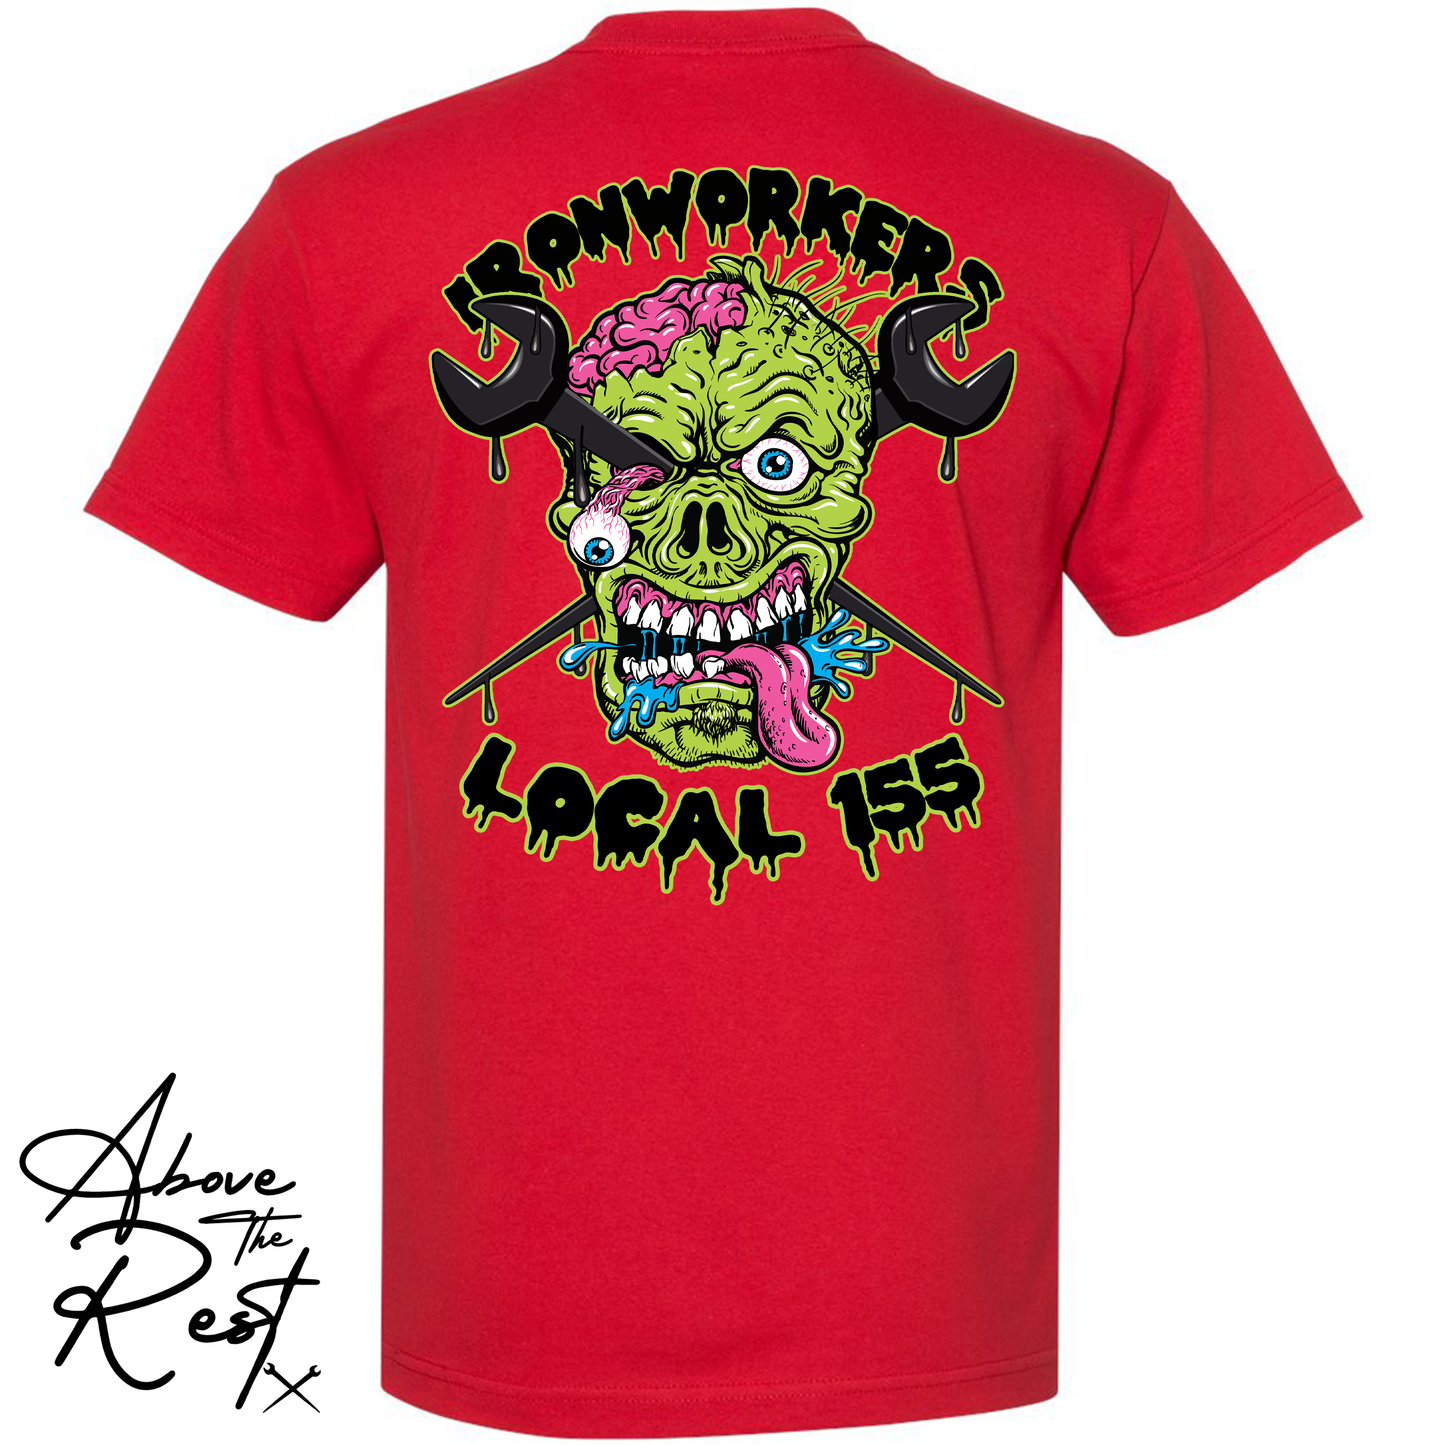 IW ZOMBIE LOCAL 155 T-SHIRT